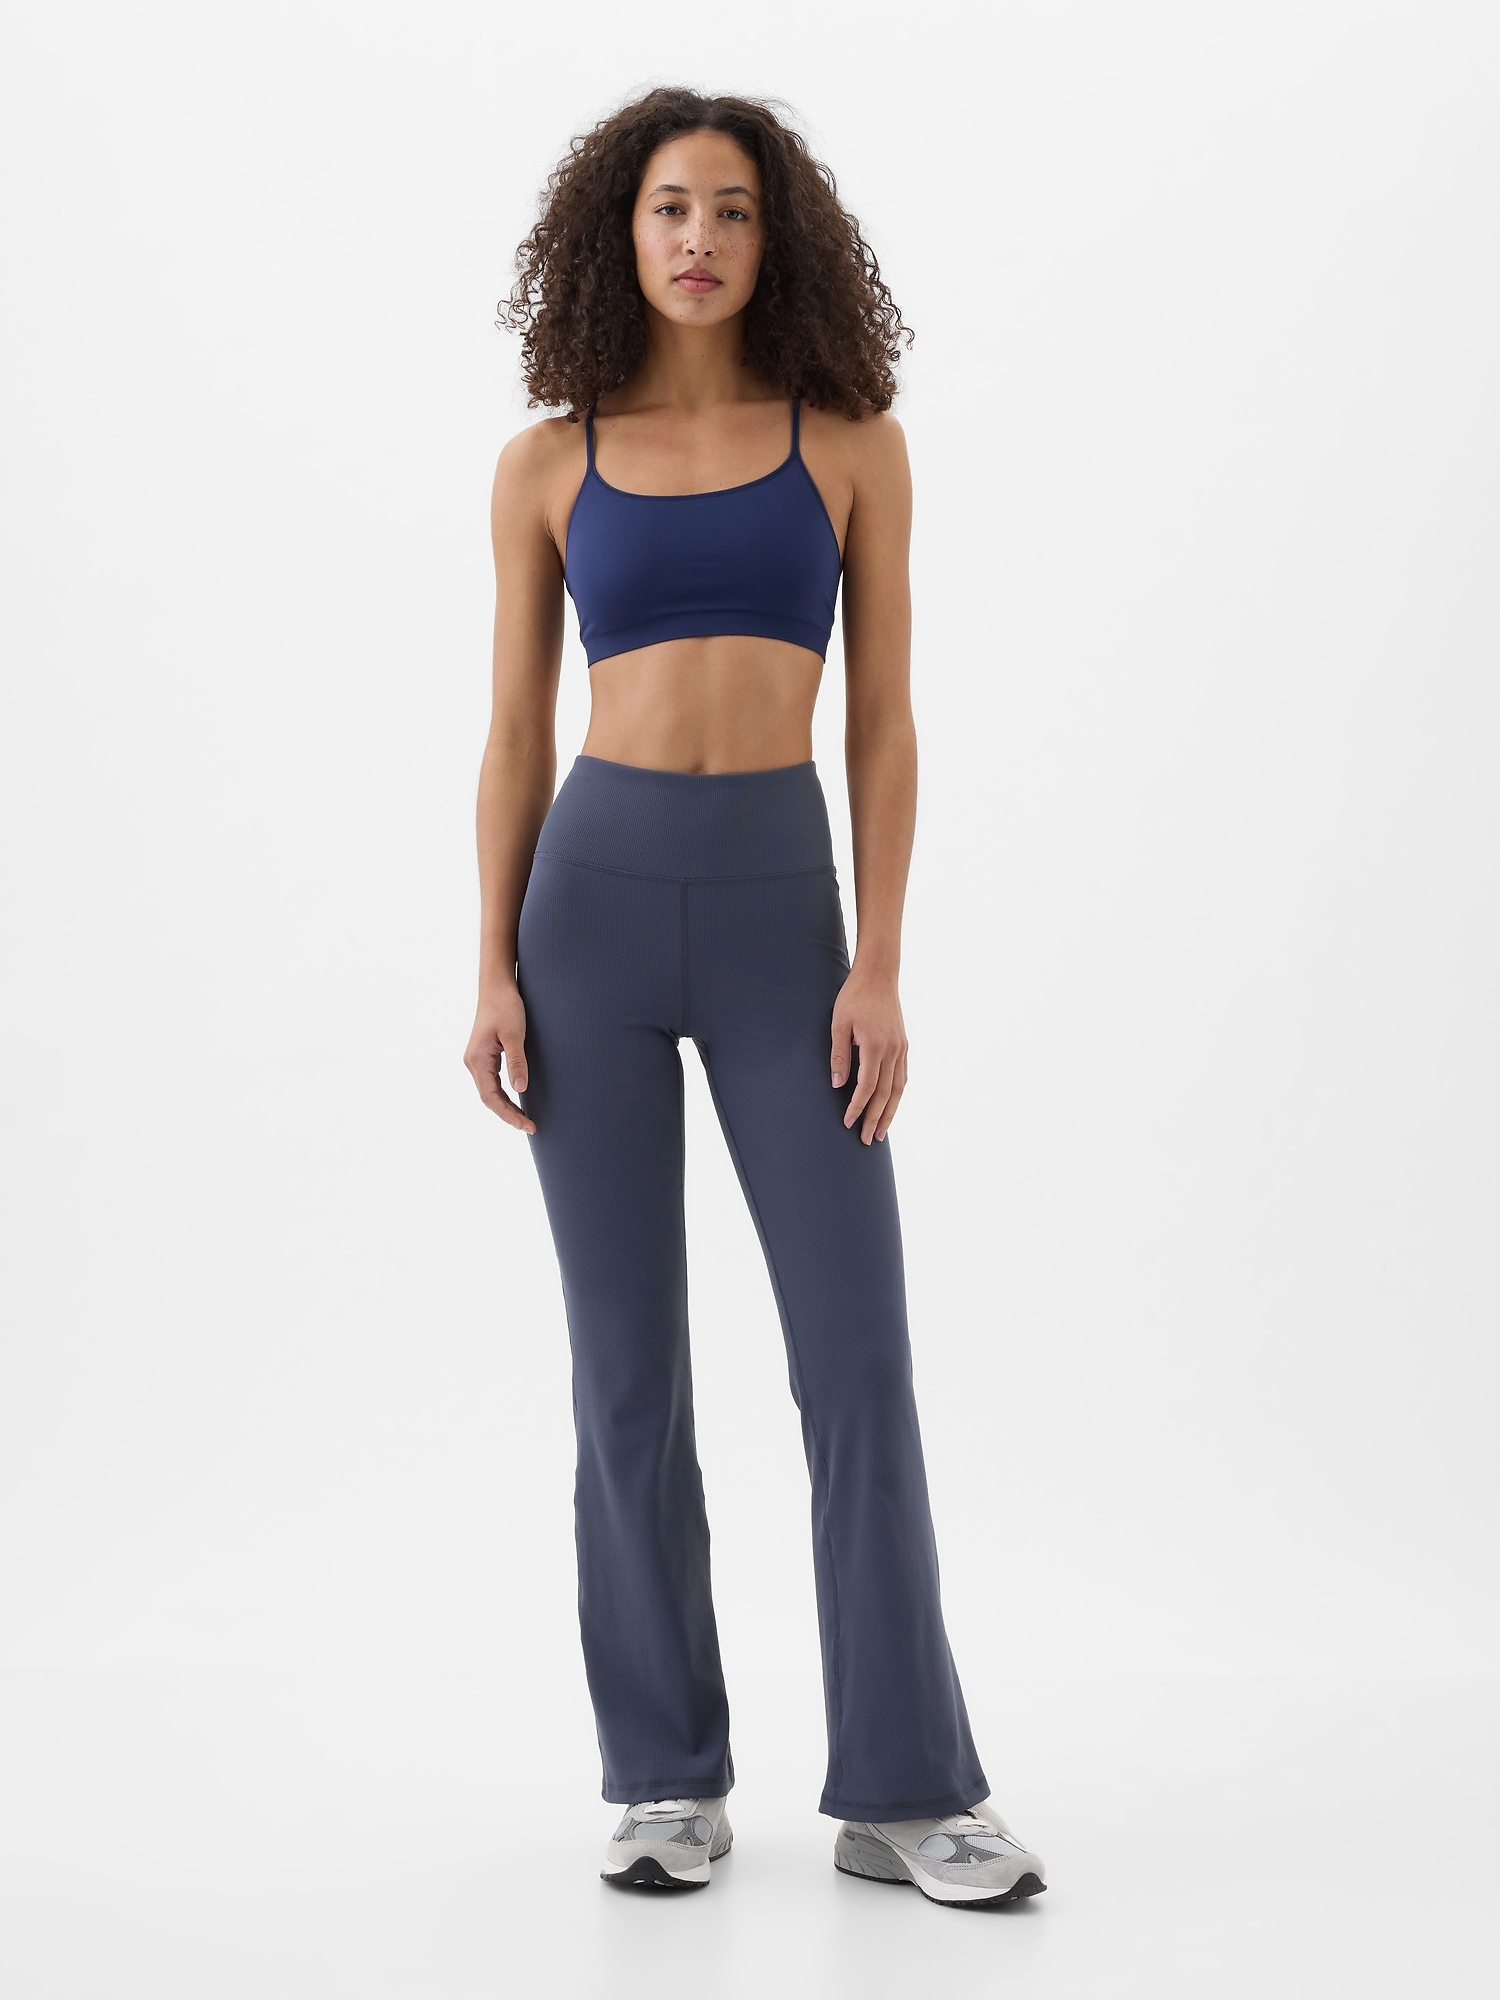 Groove Pant Flare Super High-Rise *Nulu  Flare pants, Pants for women, Lululemon  groove pant